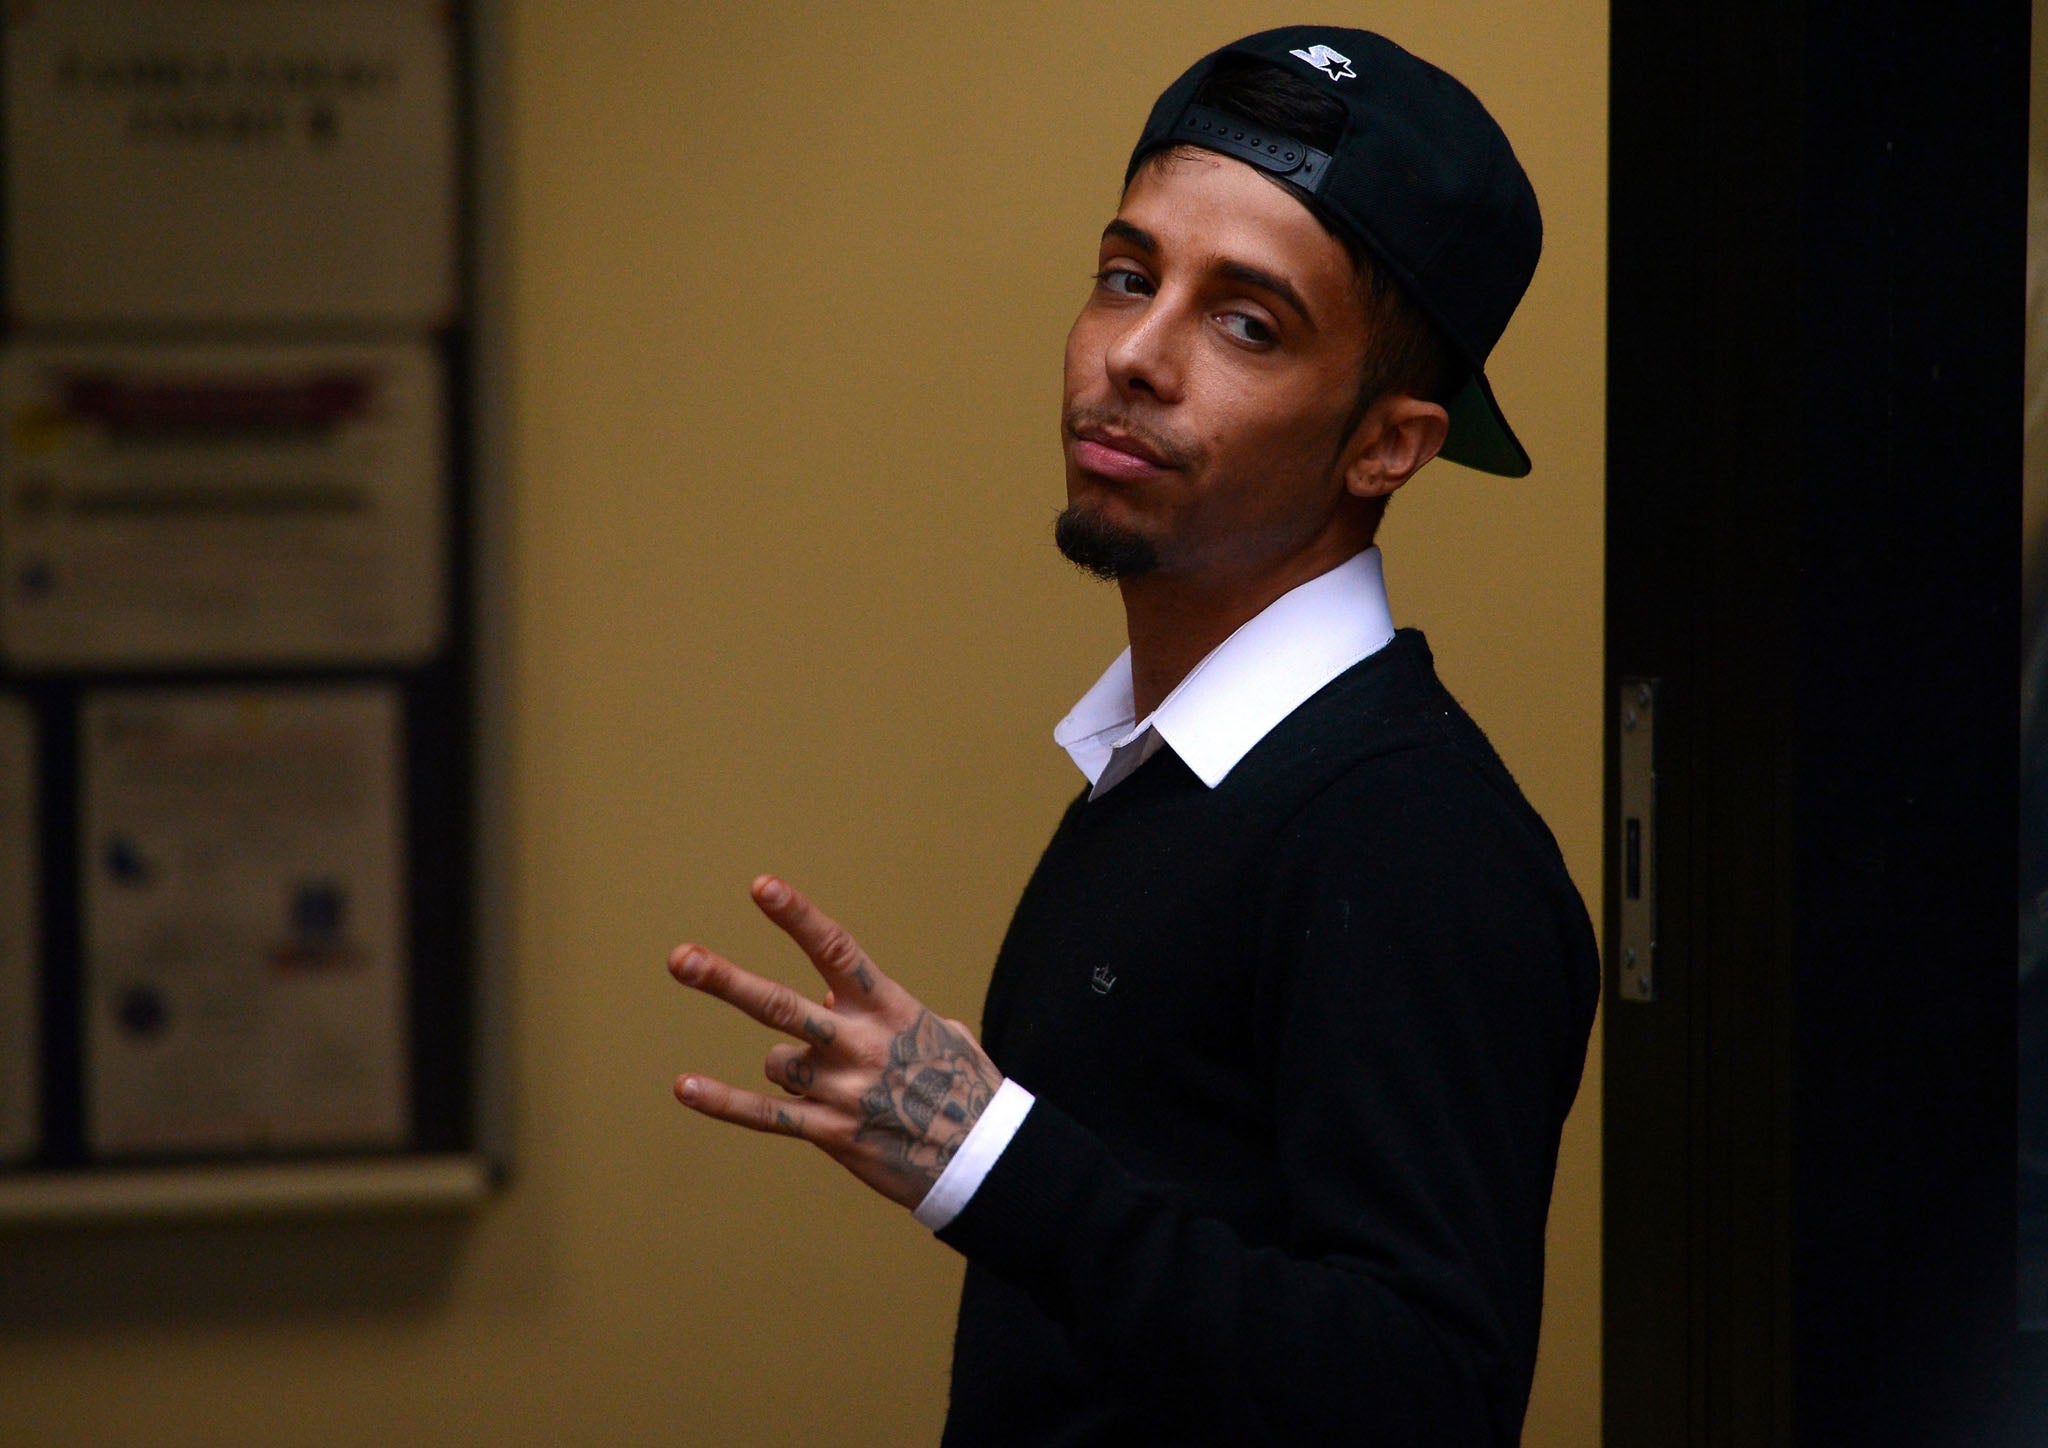 Dappy declared "I'm free" to reporters after his sentencing for assaulting a man in a Reading nightclub was adjourned to Crown Court.